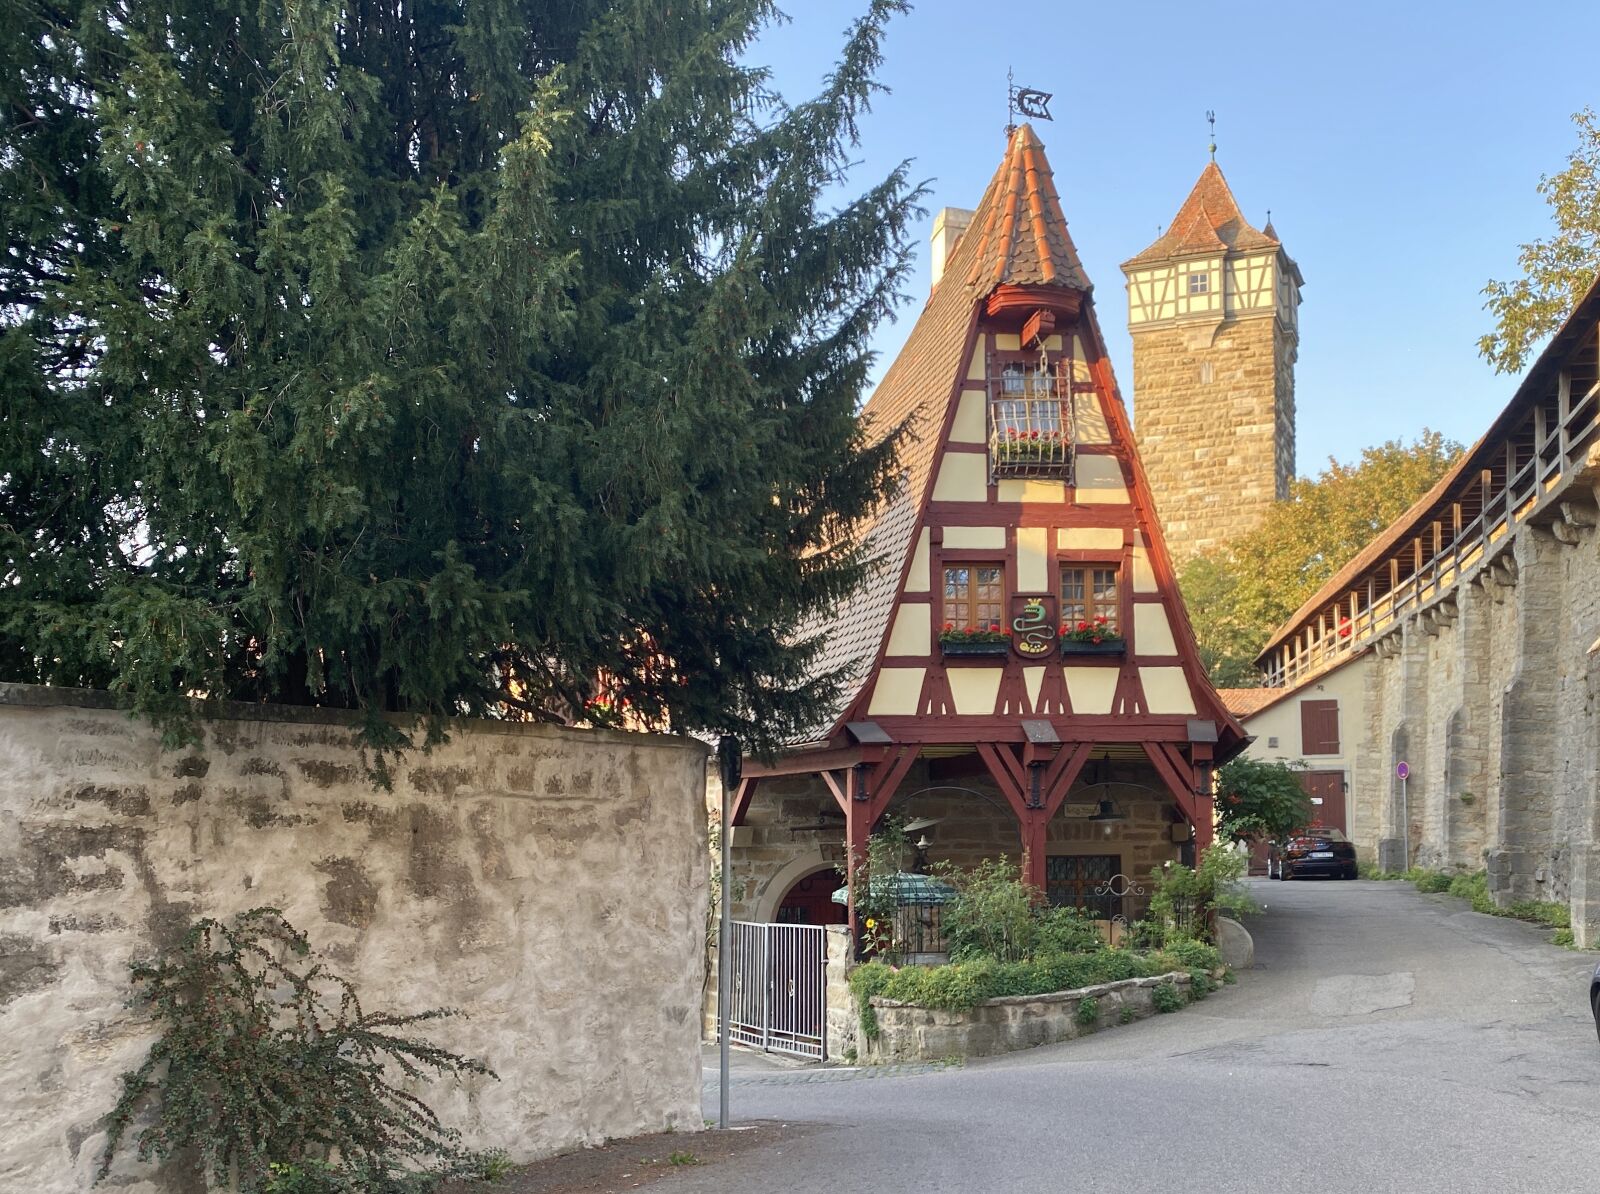 Apple iPhone 11 Pro Max + iPhone 11 Pro Max back triple camera 4.25mm f/1.8 sample photo. Rothenburg of the deaf photography